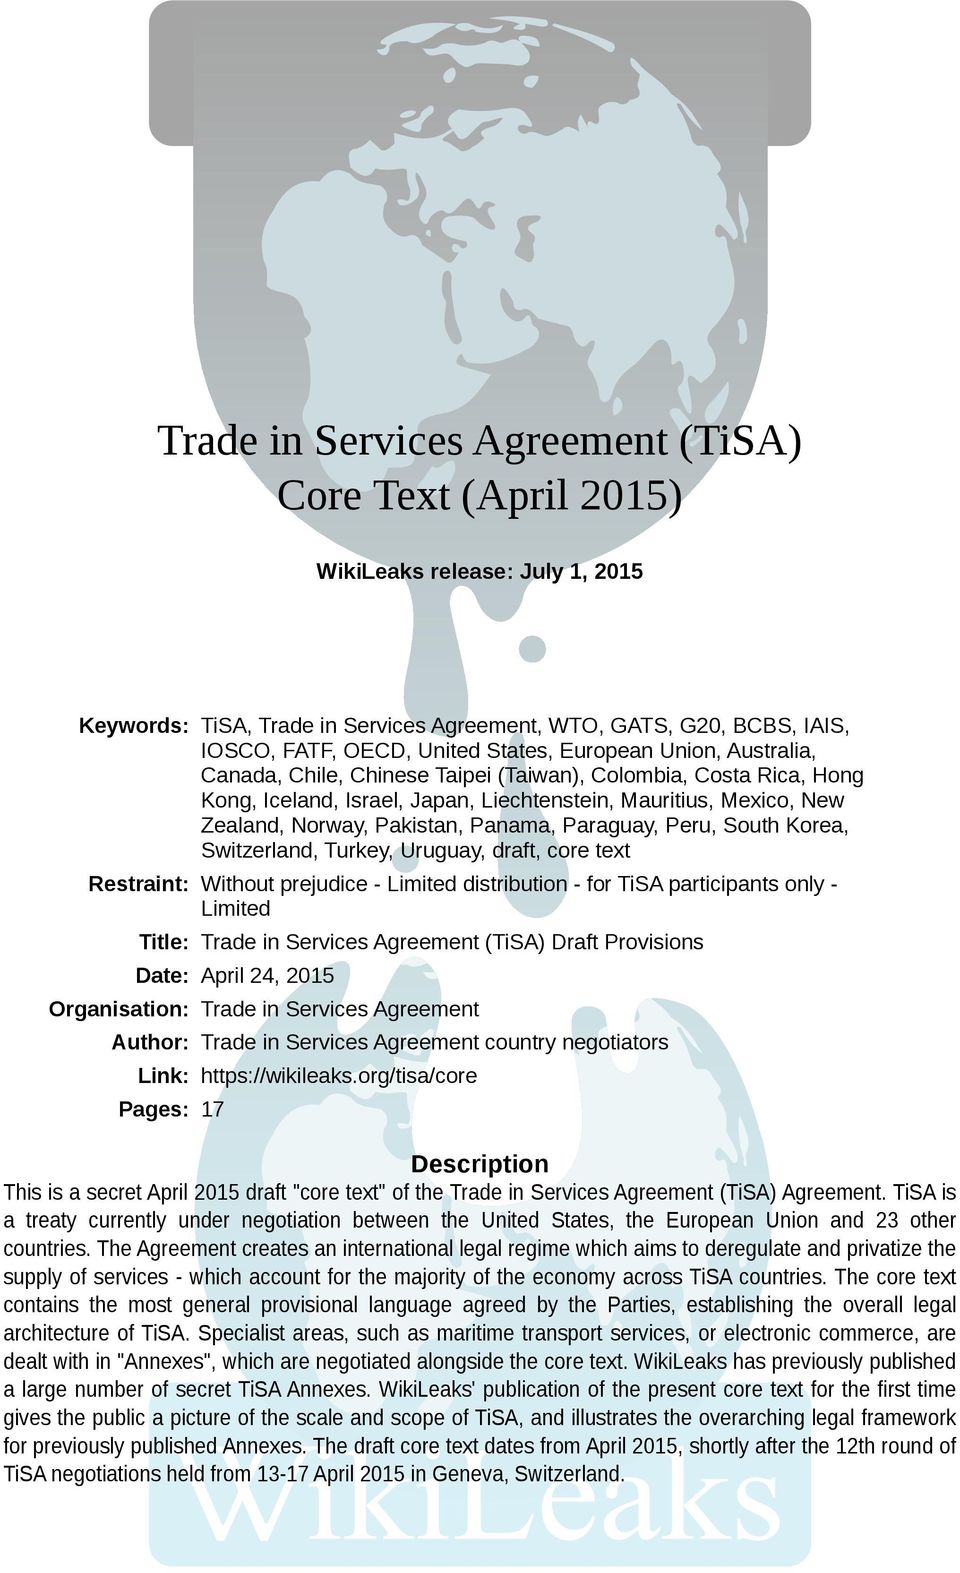 Paraguay, Peru, South Korea, Switzerland, Turkey, Uruguay, draft, core text Restraint: Without prejudice - distribution - for TiSA participants only - Title: Trade in Services Agreement (TiSA) Draft